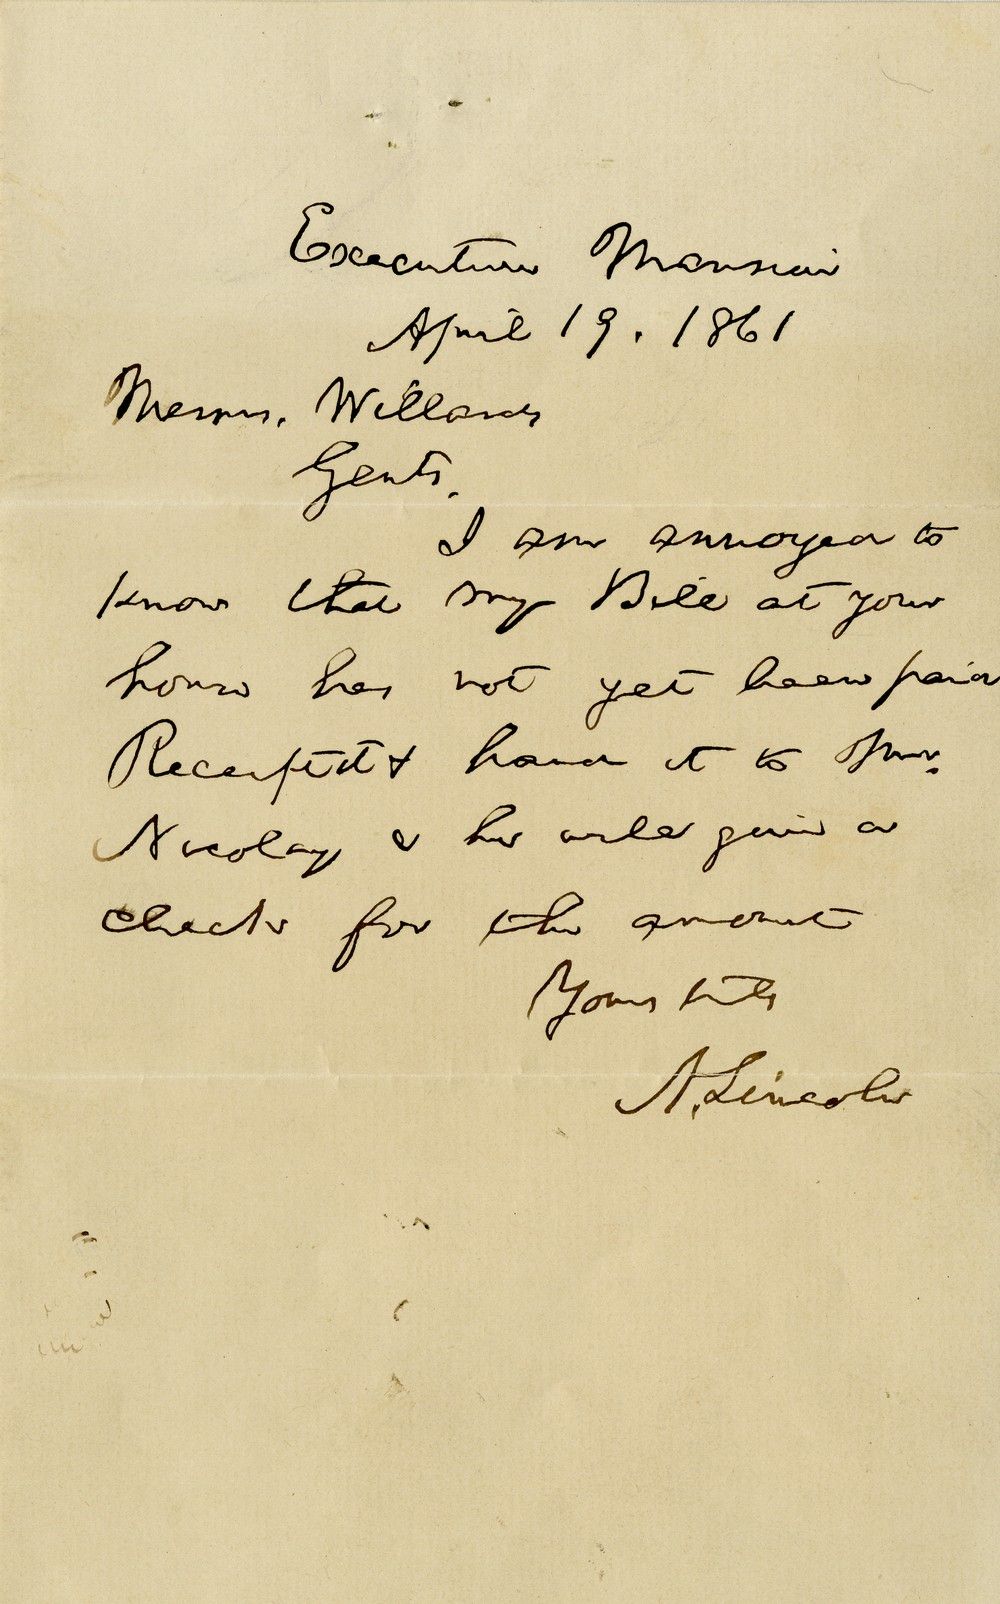 "Honest Abe" Lincoln, Annoyed About an Unpaid Bill, Orders It Paid – On the Day He Effectively Declares War